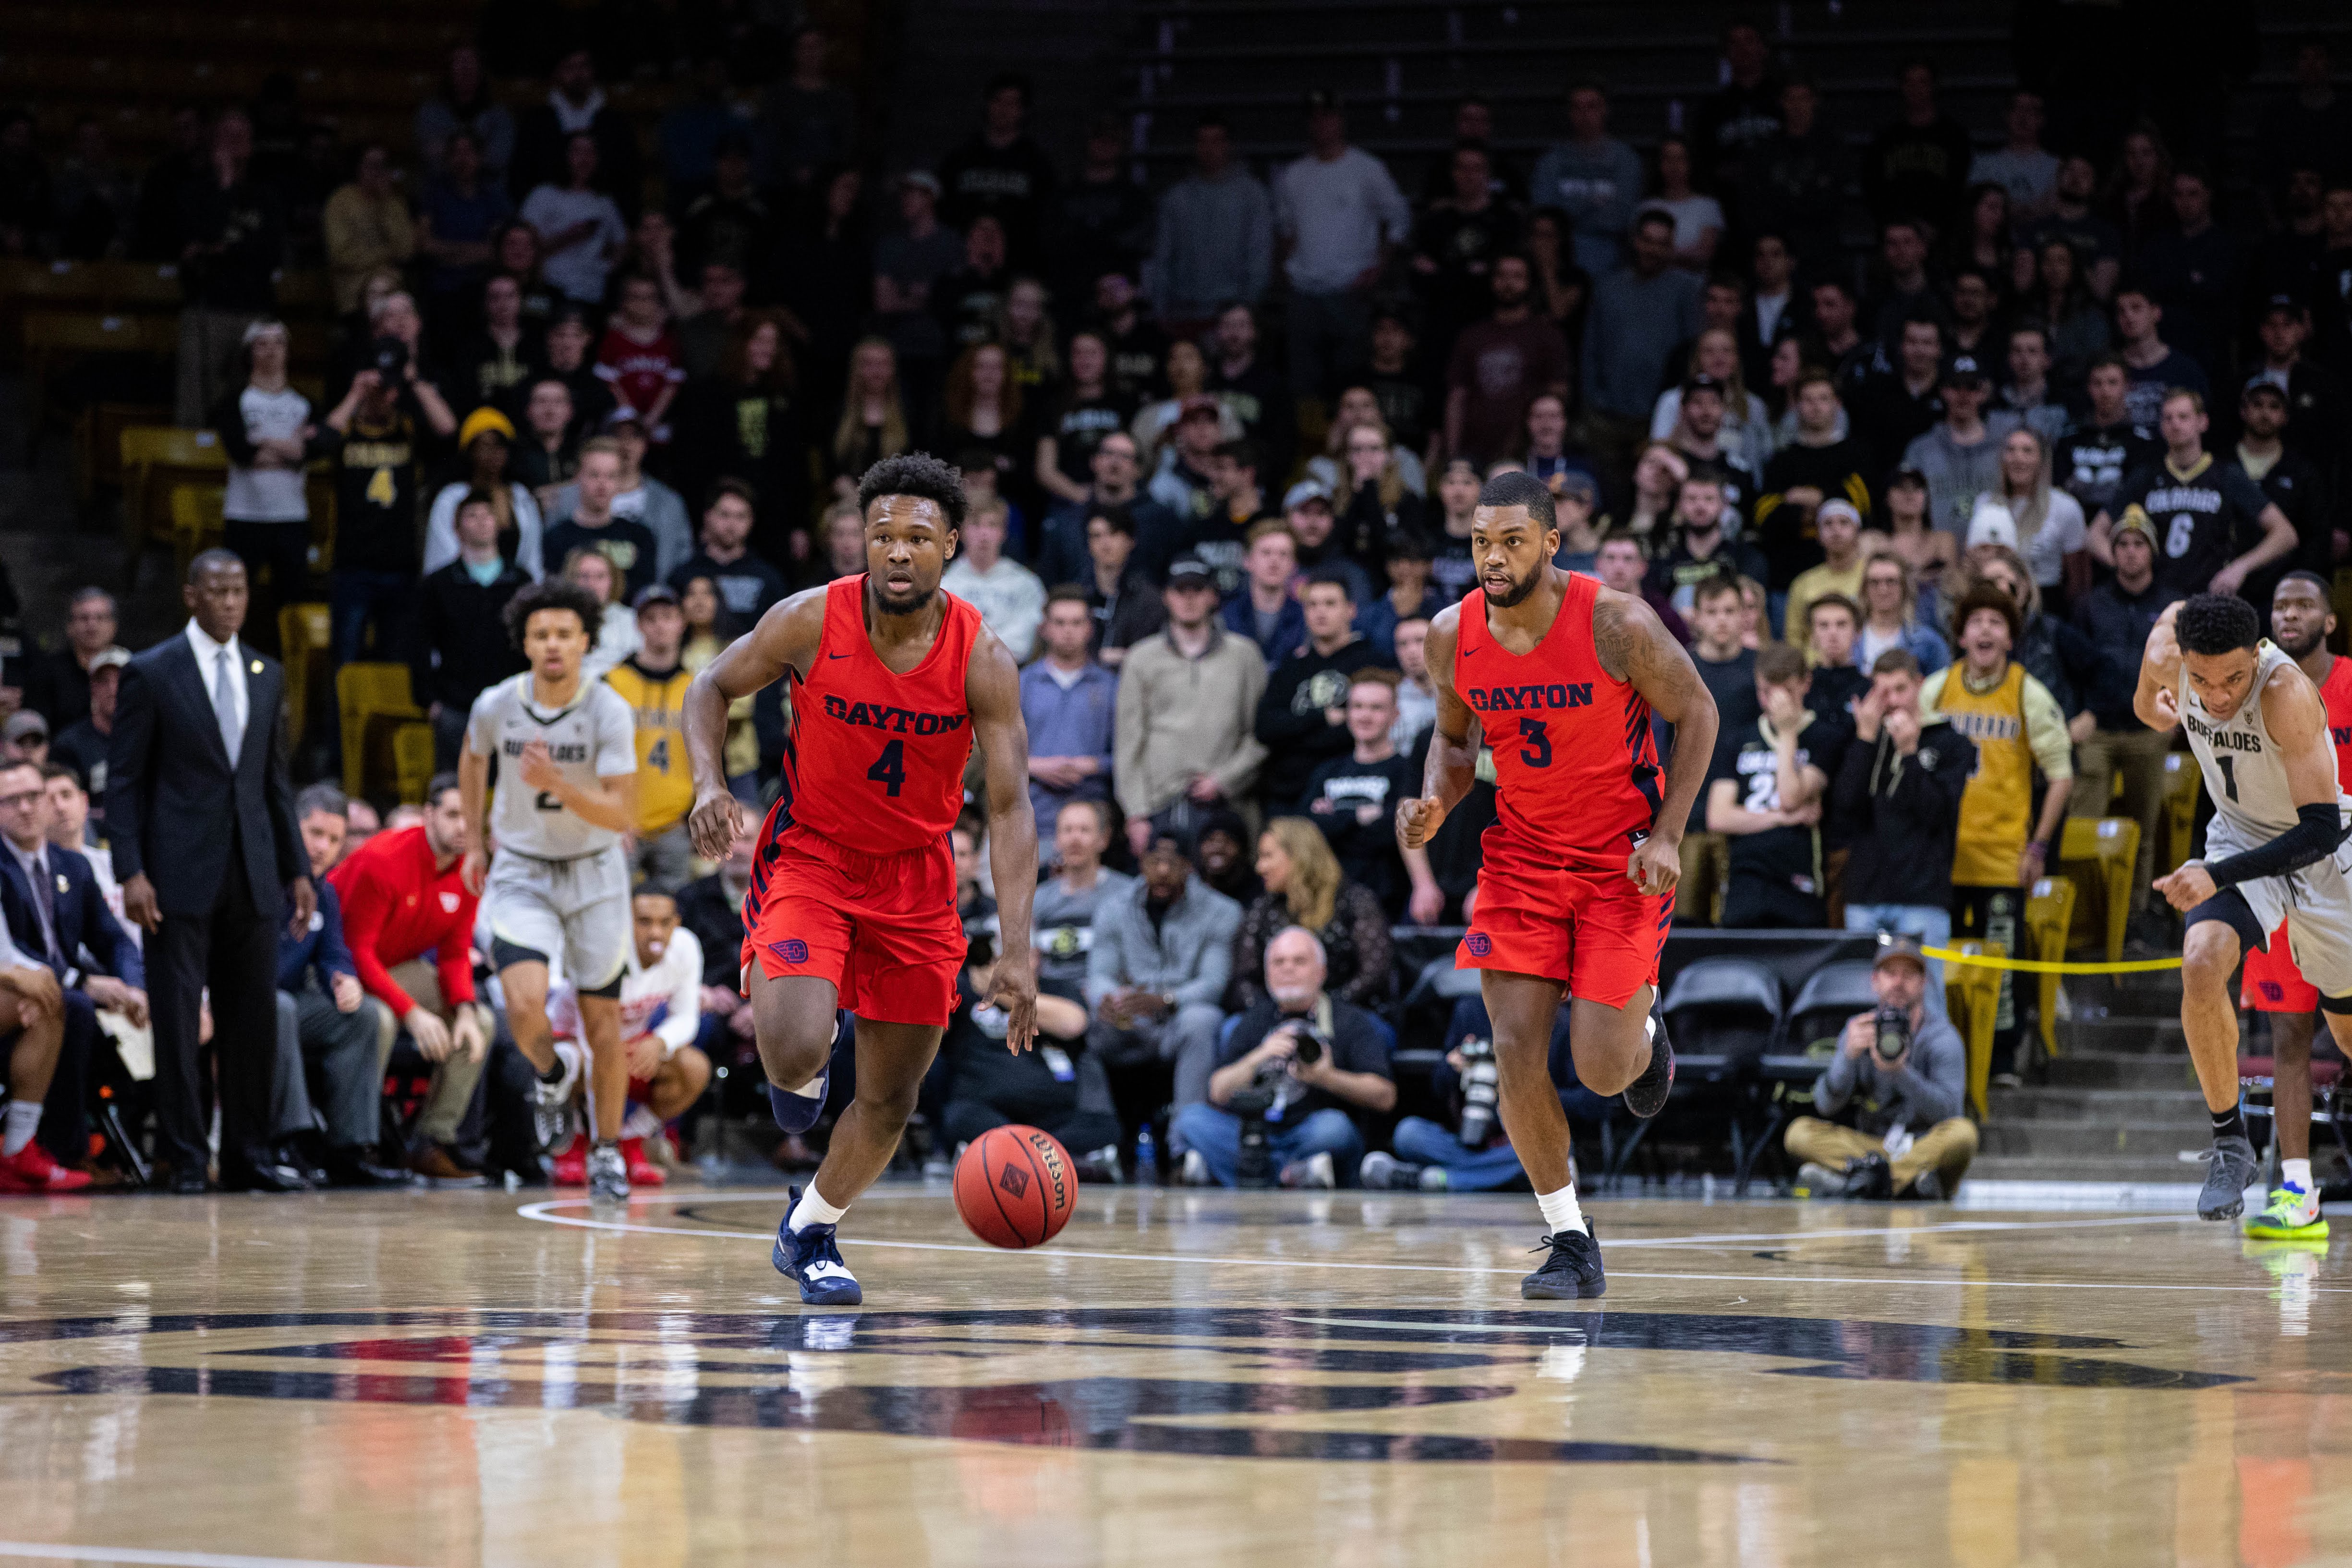 Colorado outlasts Dayton in opening round of NIT, 78-73